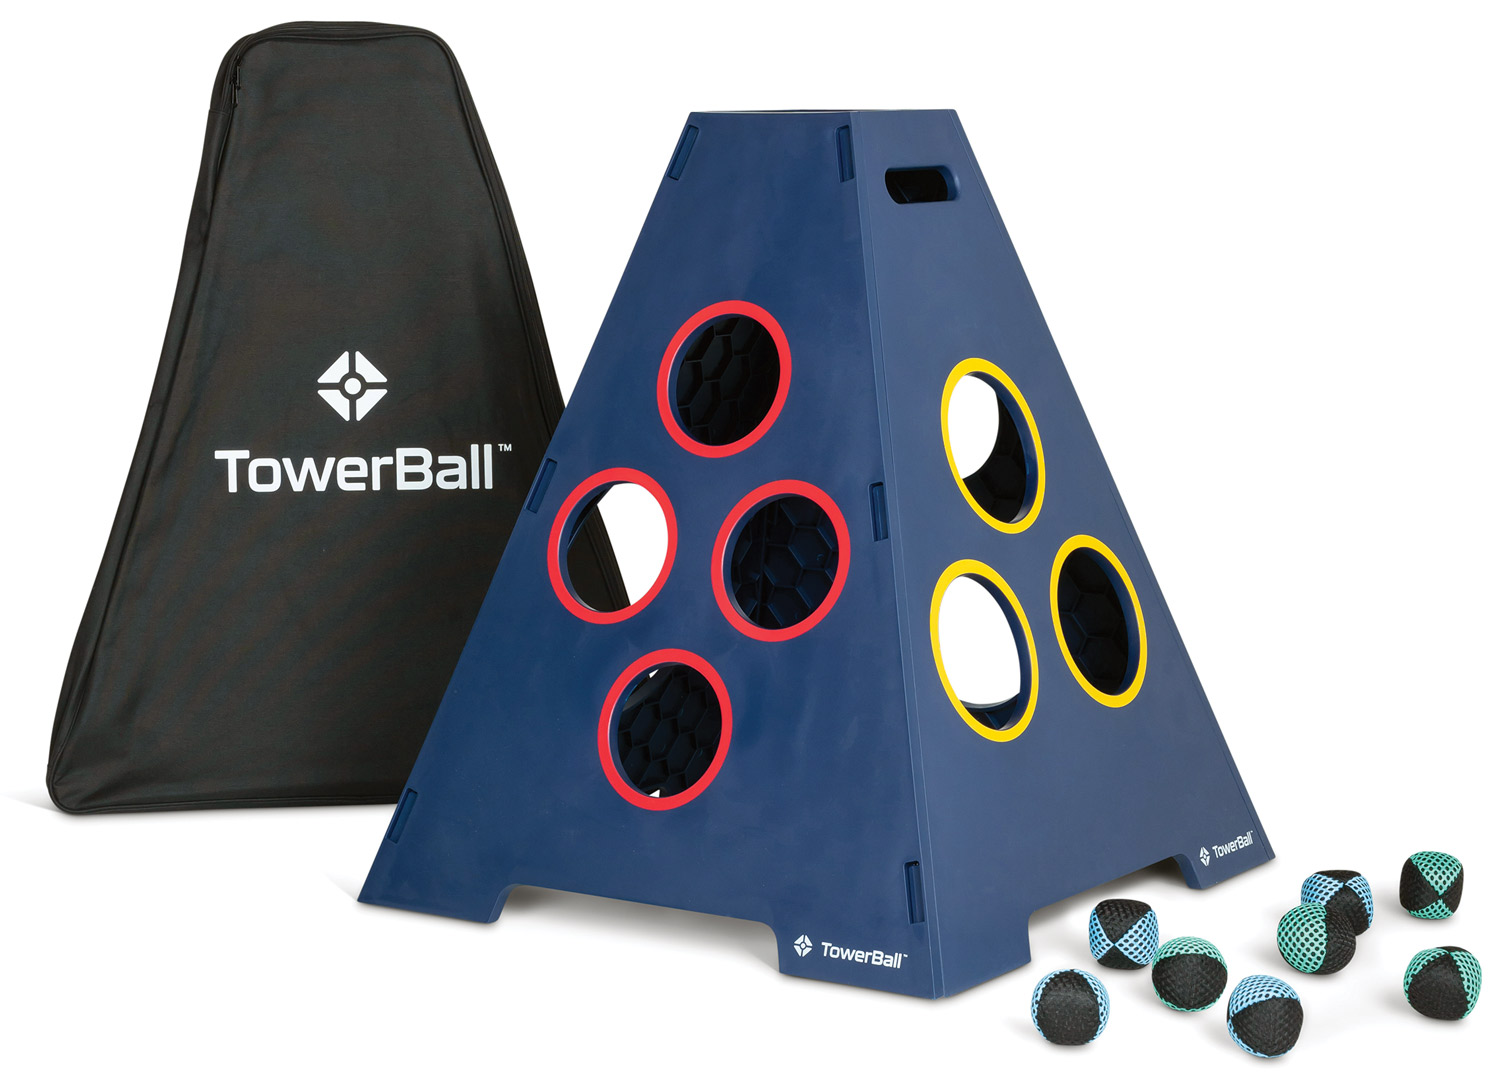 Towerball game and its parts